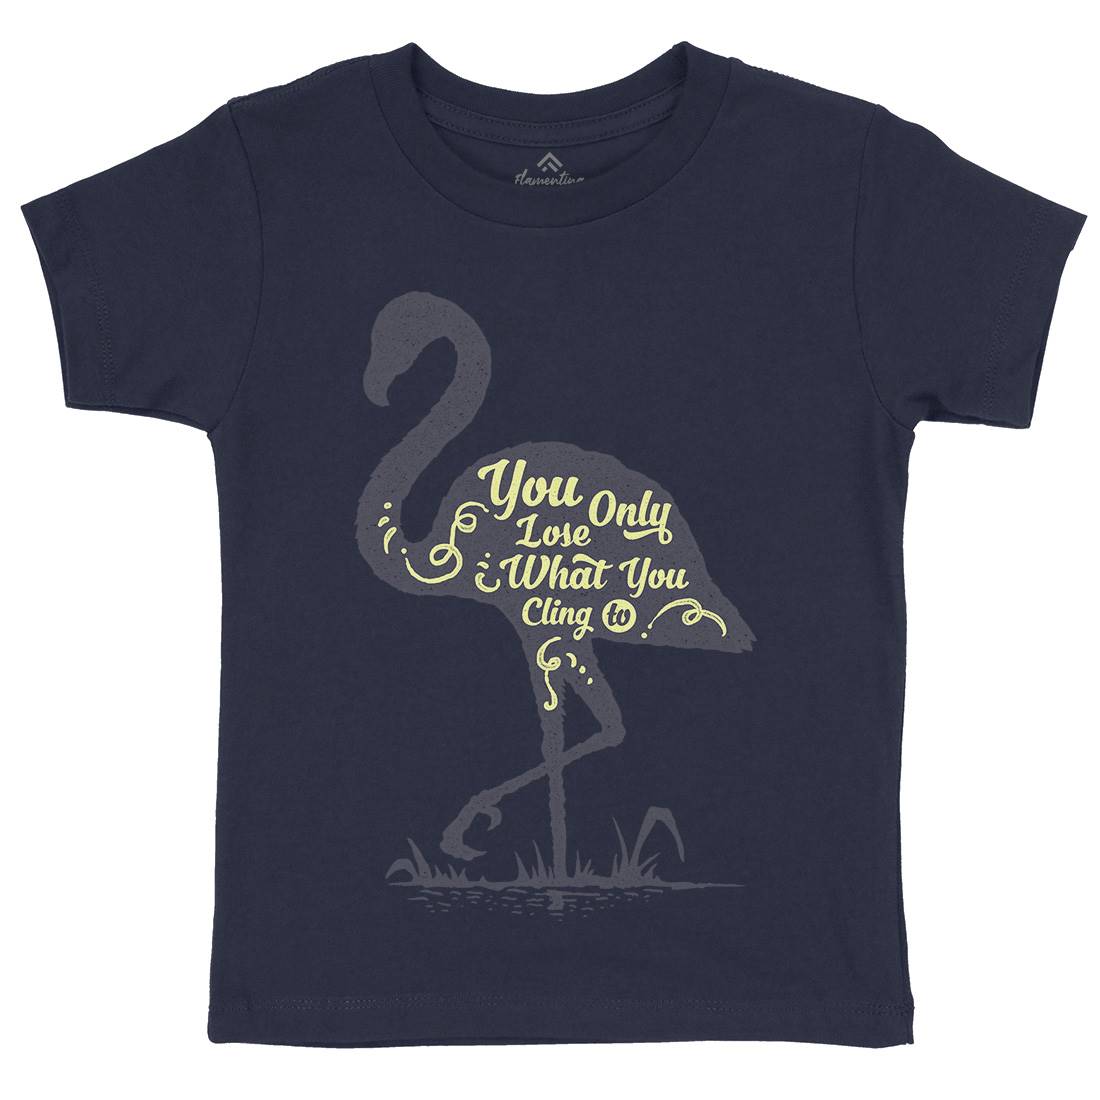 You Only Lose Kids Organic Crew Neck T-Shirt Quotes A395